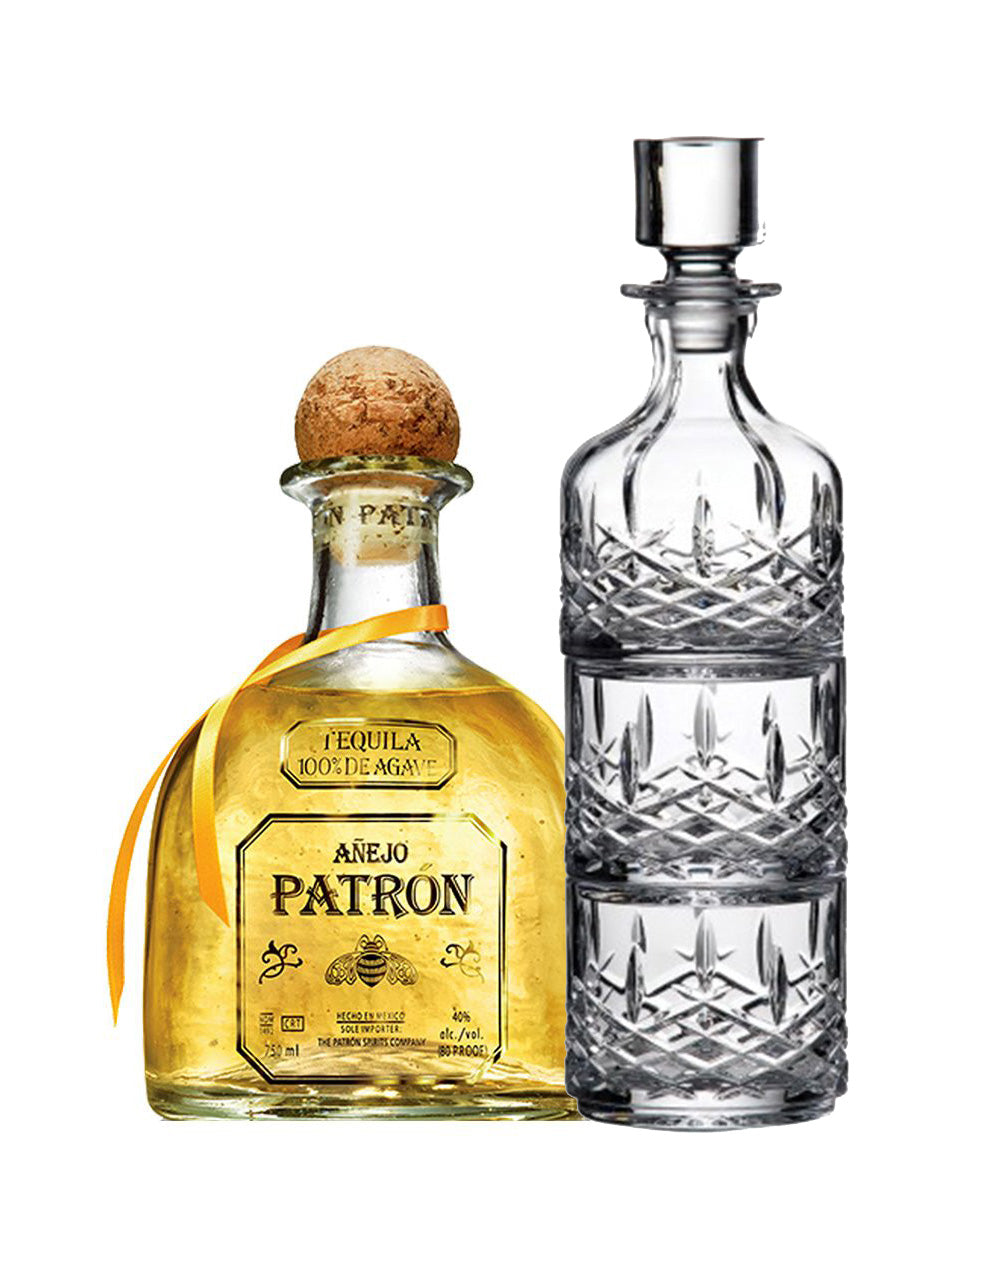 Patron Tequila Custom Engraved & Personalized Bottle Decanter empty,  Engraved Label Birthday Gift Tequila Lover 